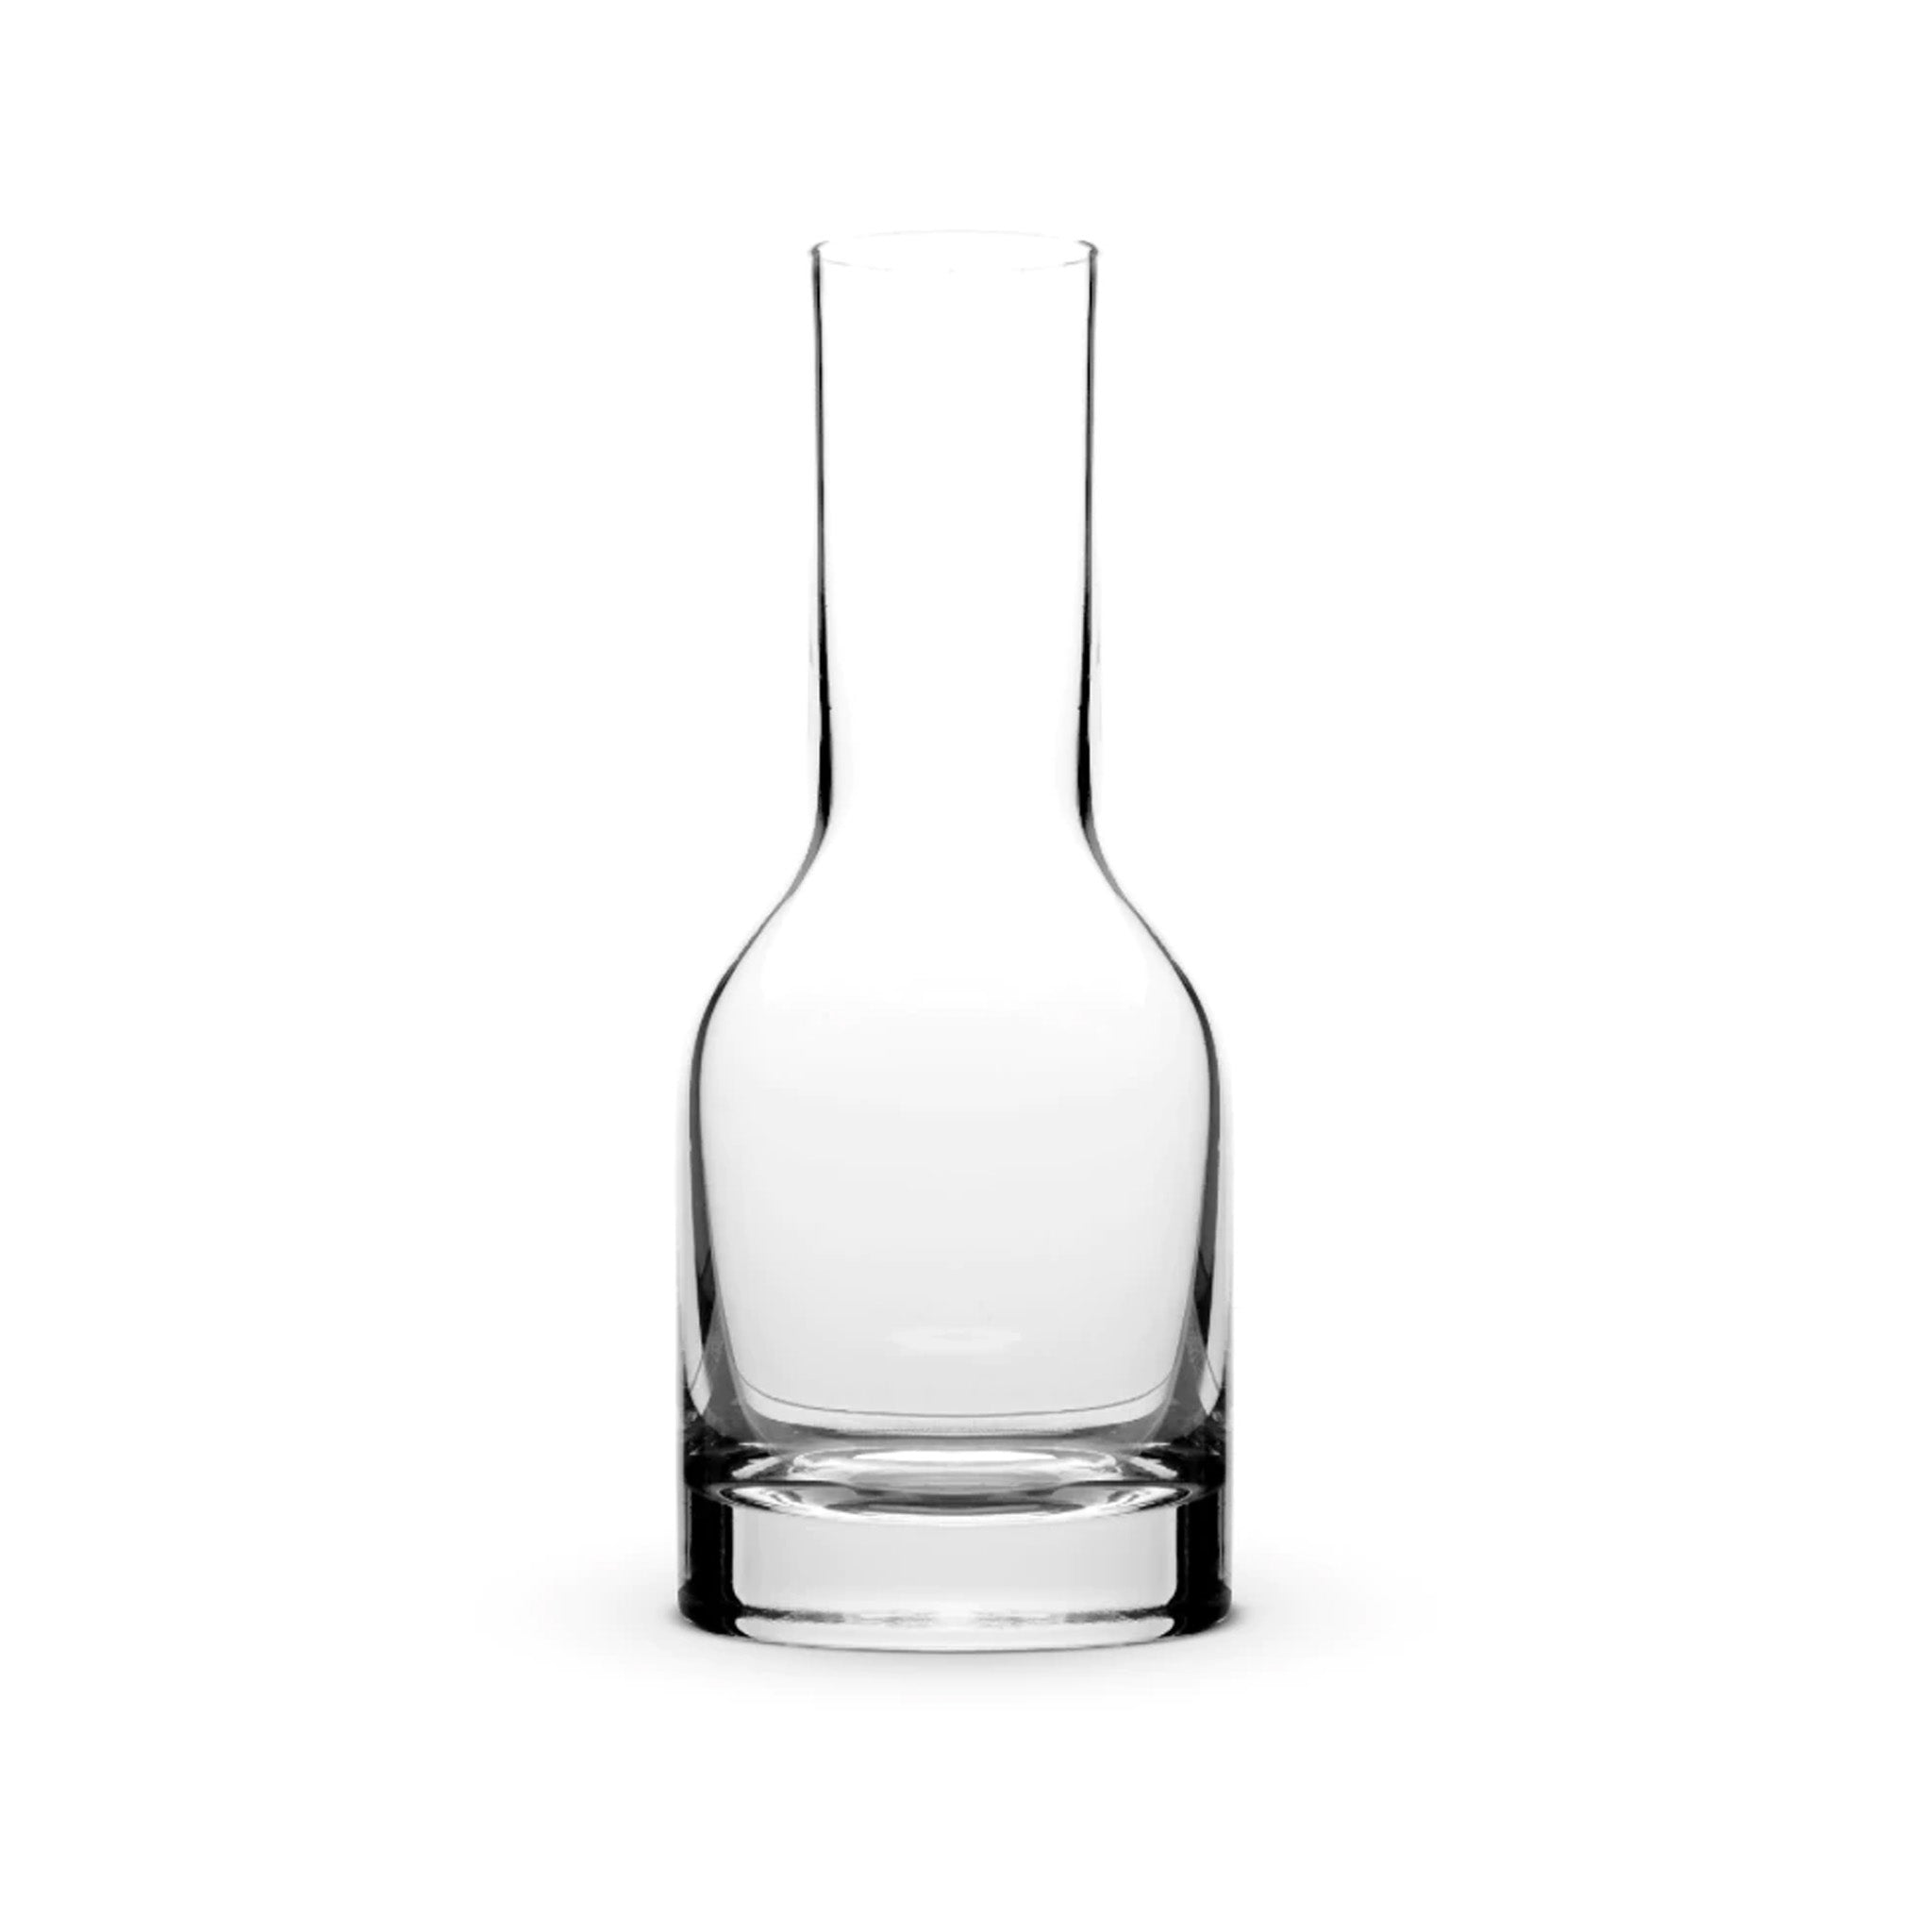 Carafe by John Pawson for When Objects Work